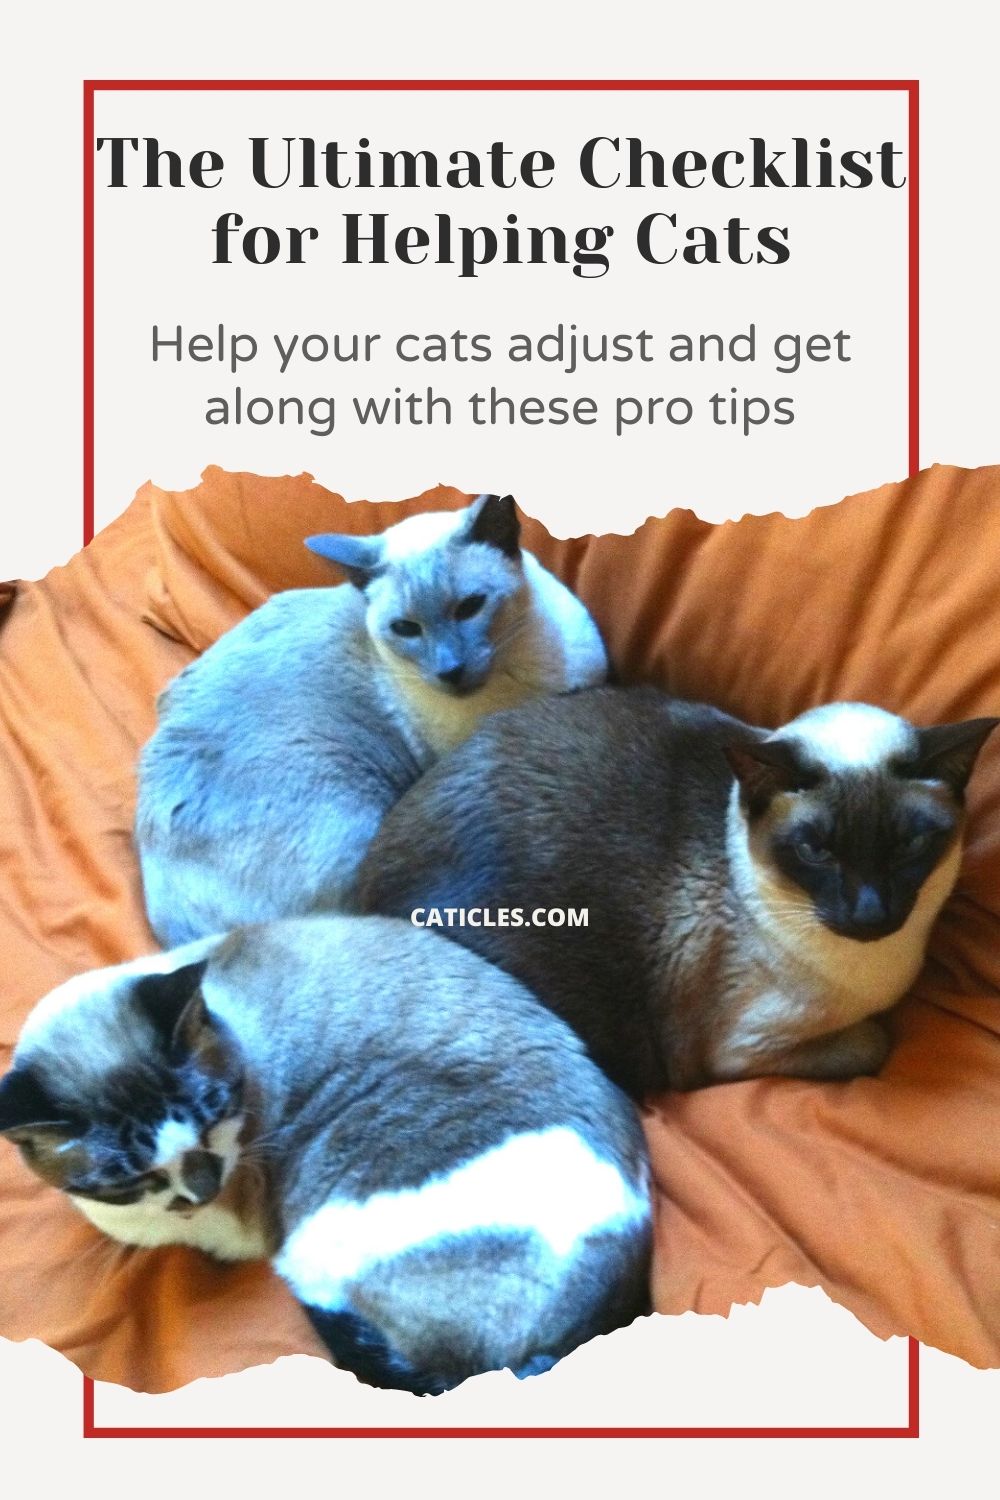 how to help cats adjust and get along pin image